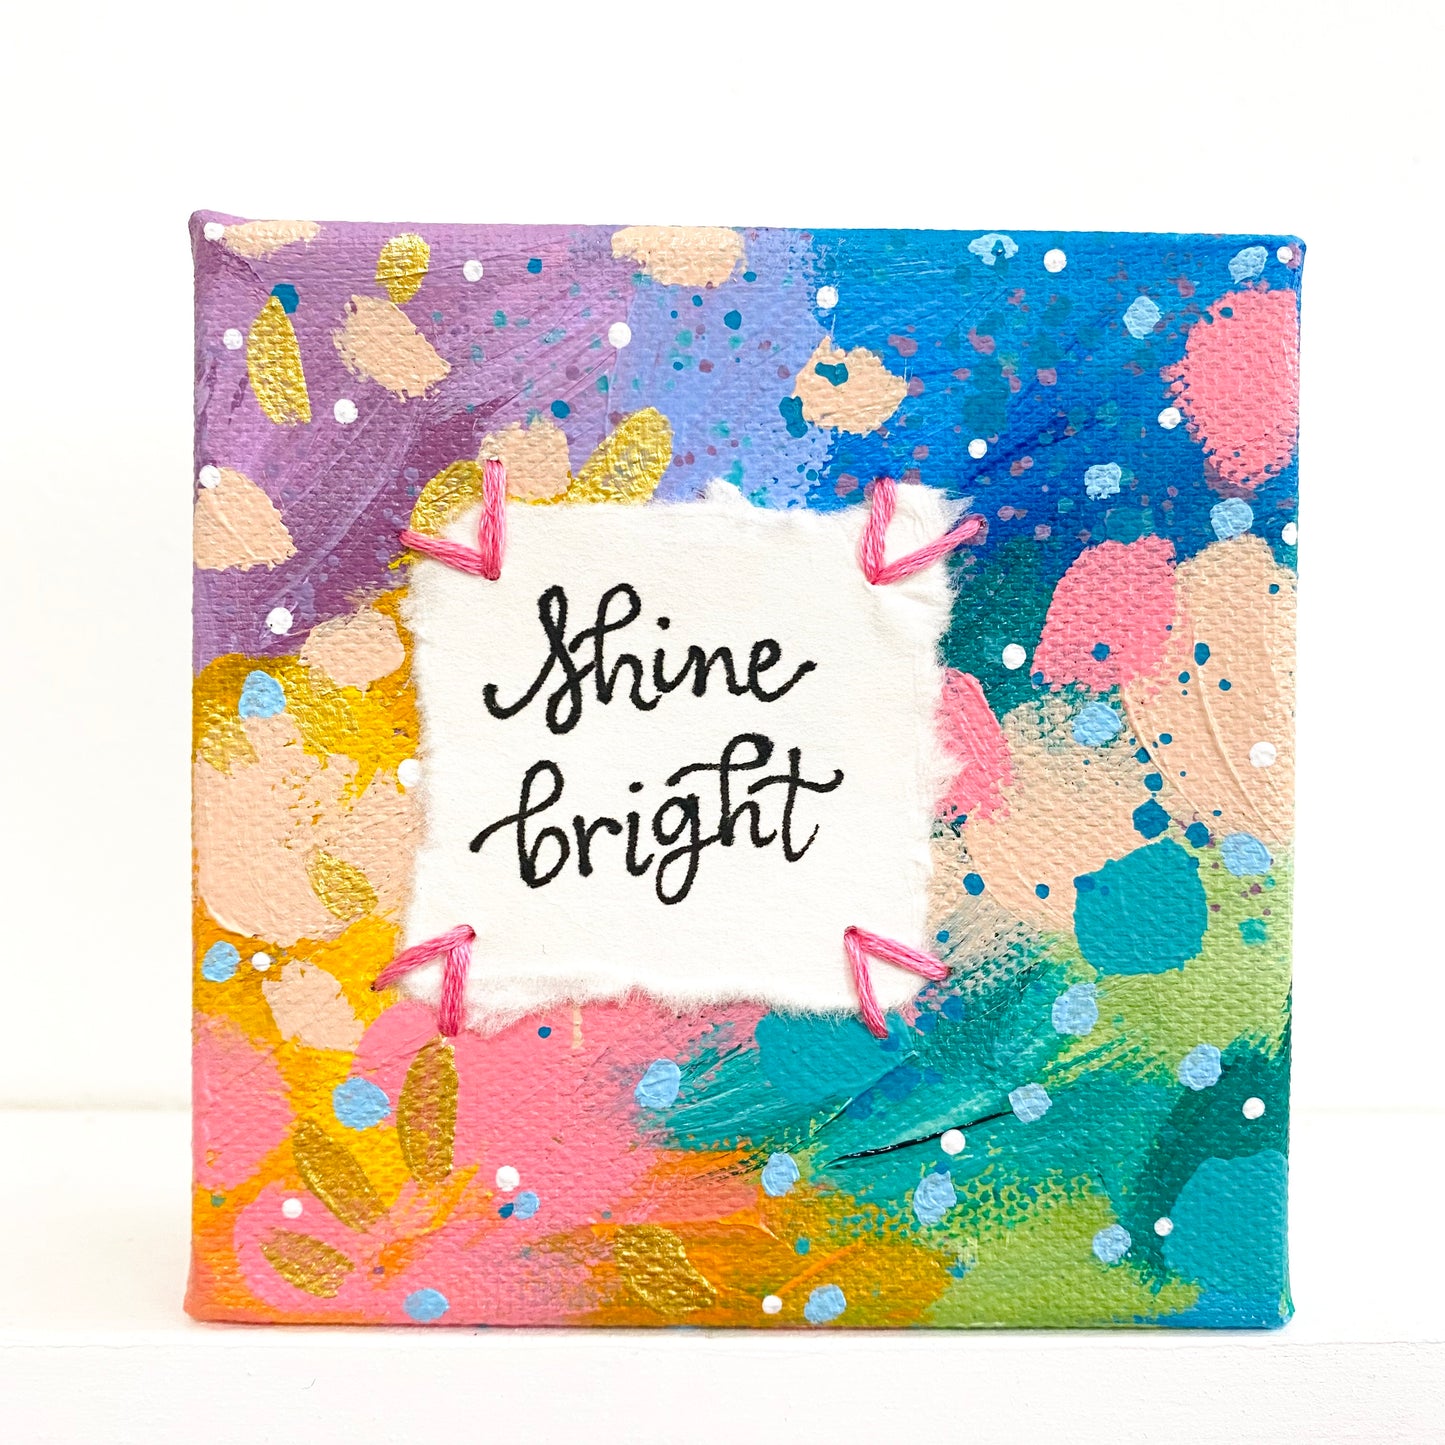 Shine Bright 4x4 inch original abstract canvas with embroidery thread accents